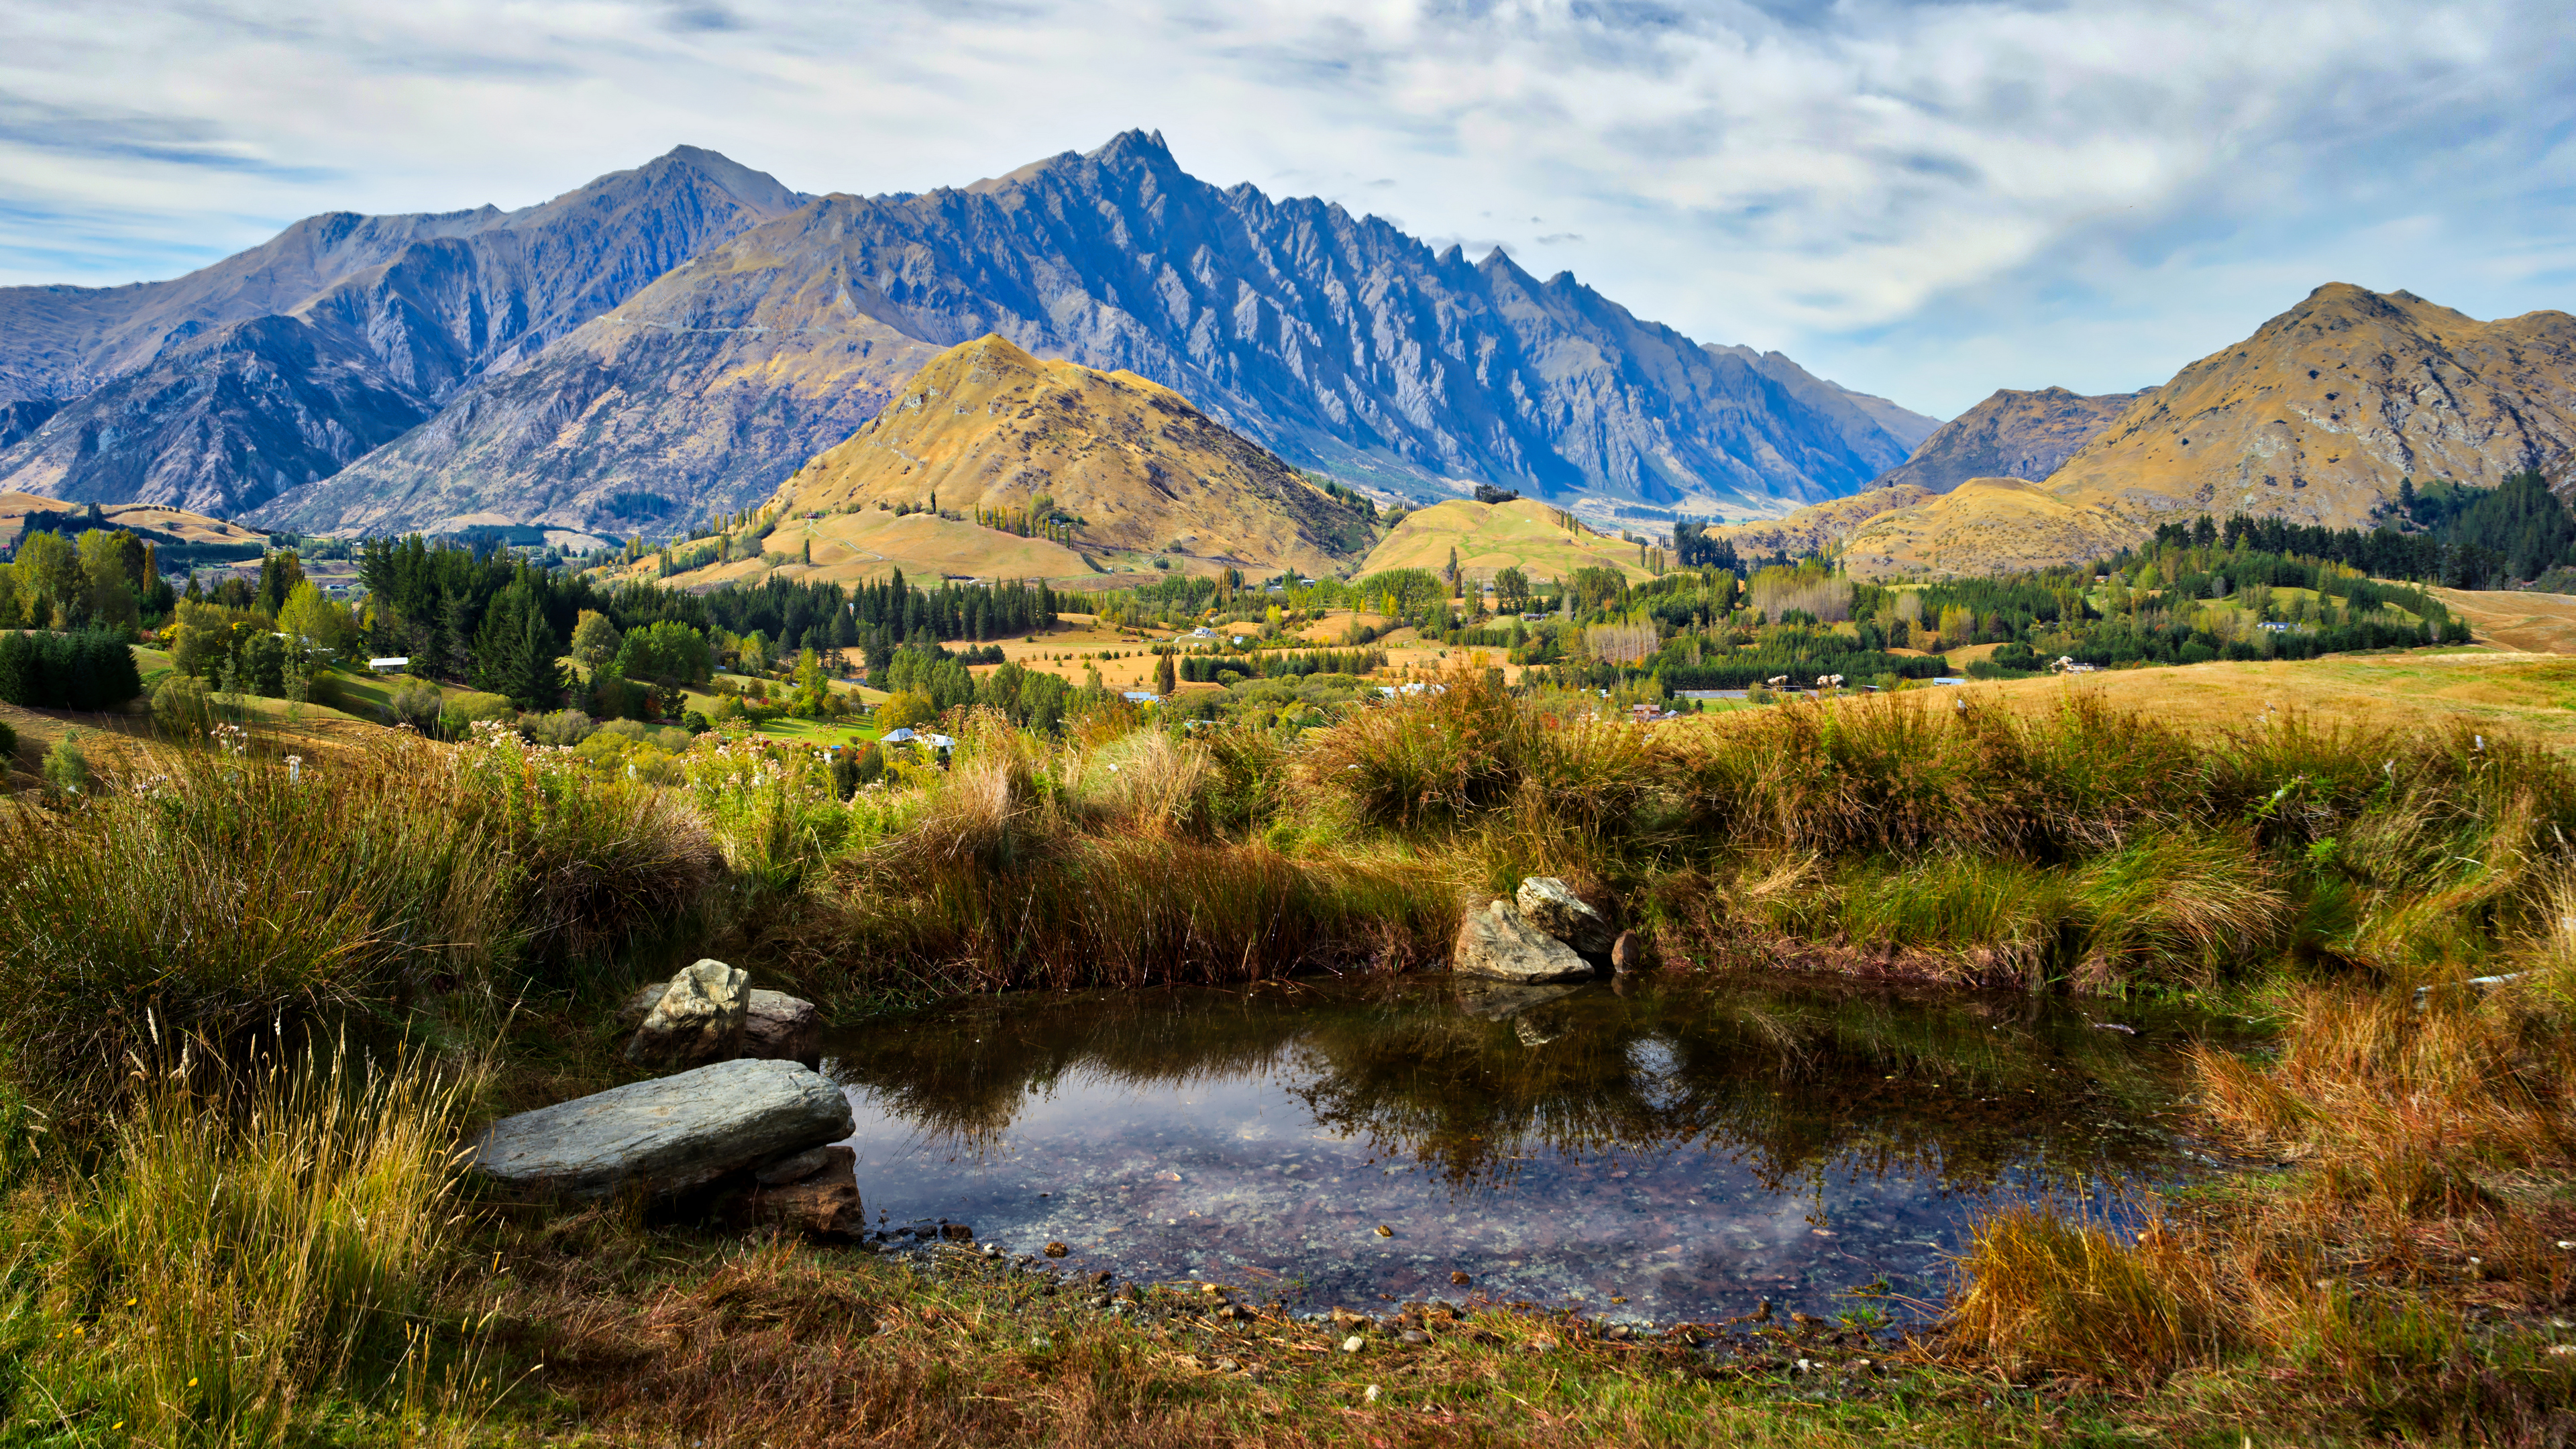 General 3840x2160 landscape 4K New Zealand nature water reflection mountains trees clouds